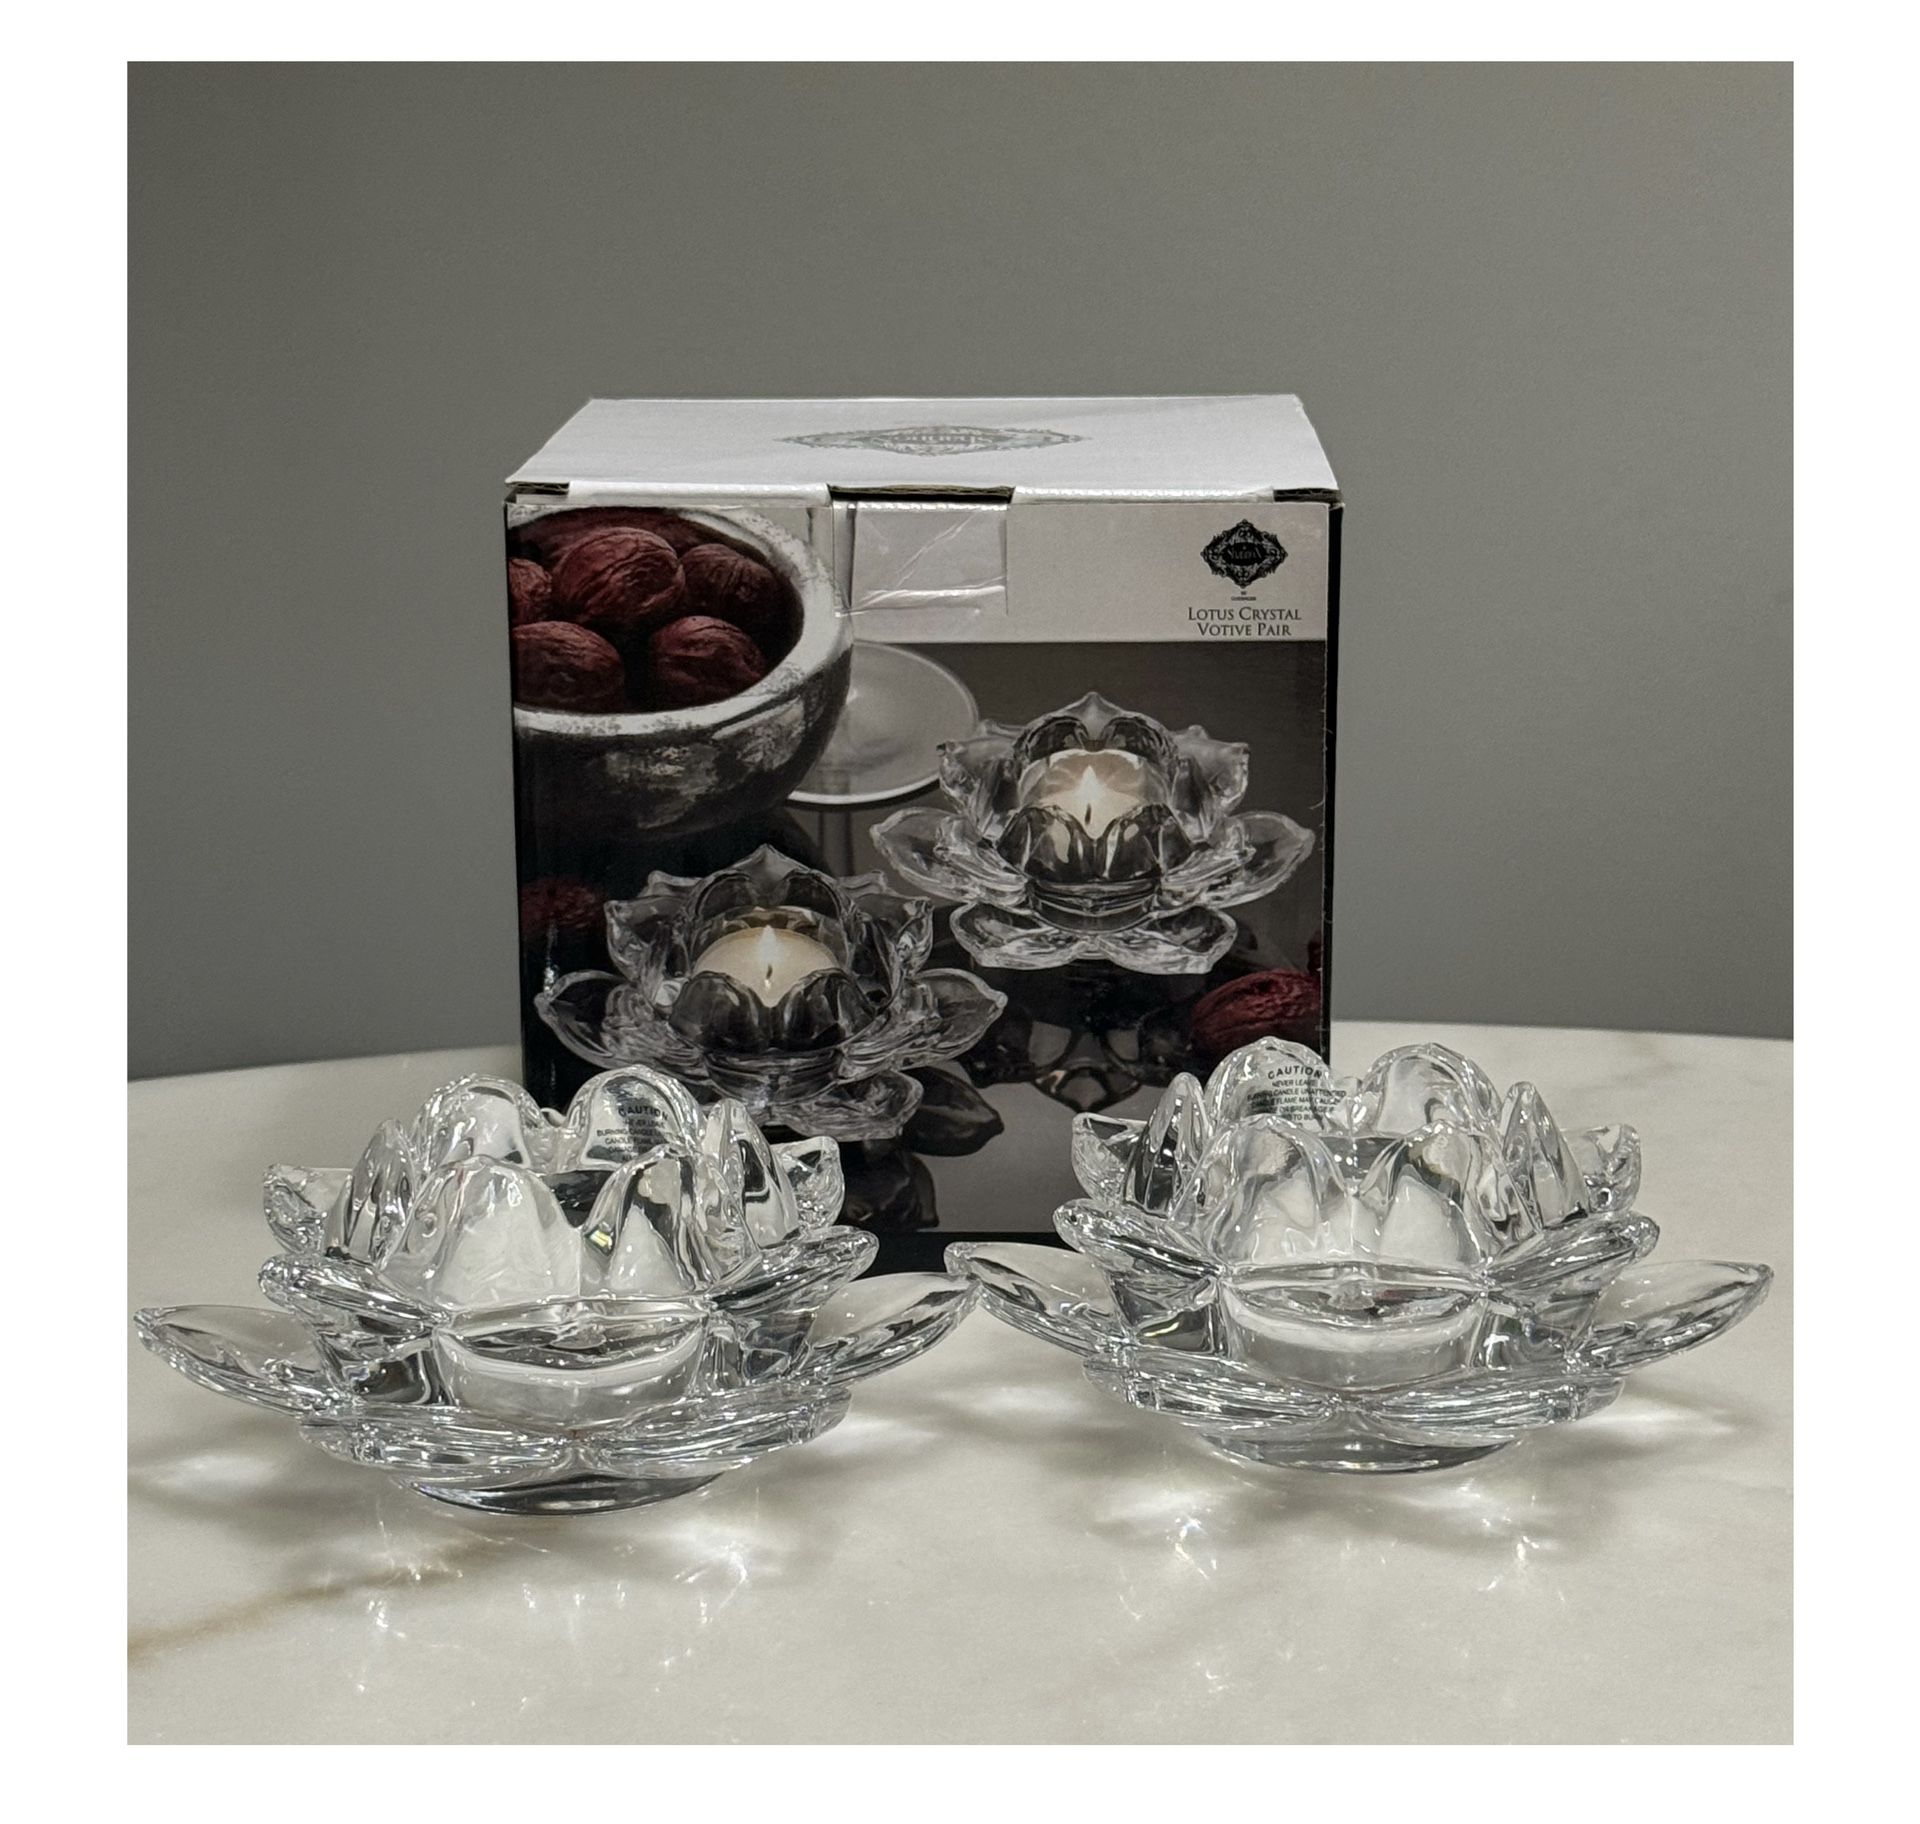 Brand new Shannon by Godinger Lotus Crystal Votive Pair Candle Holders Set of 2 